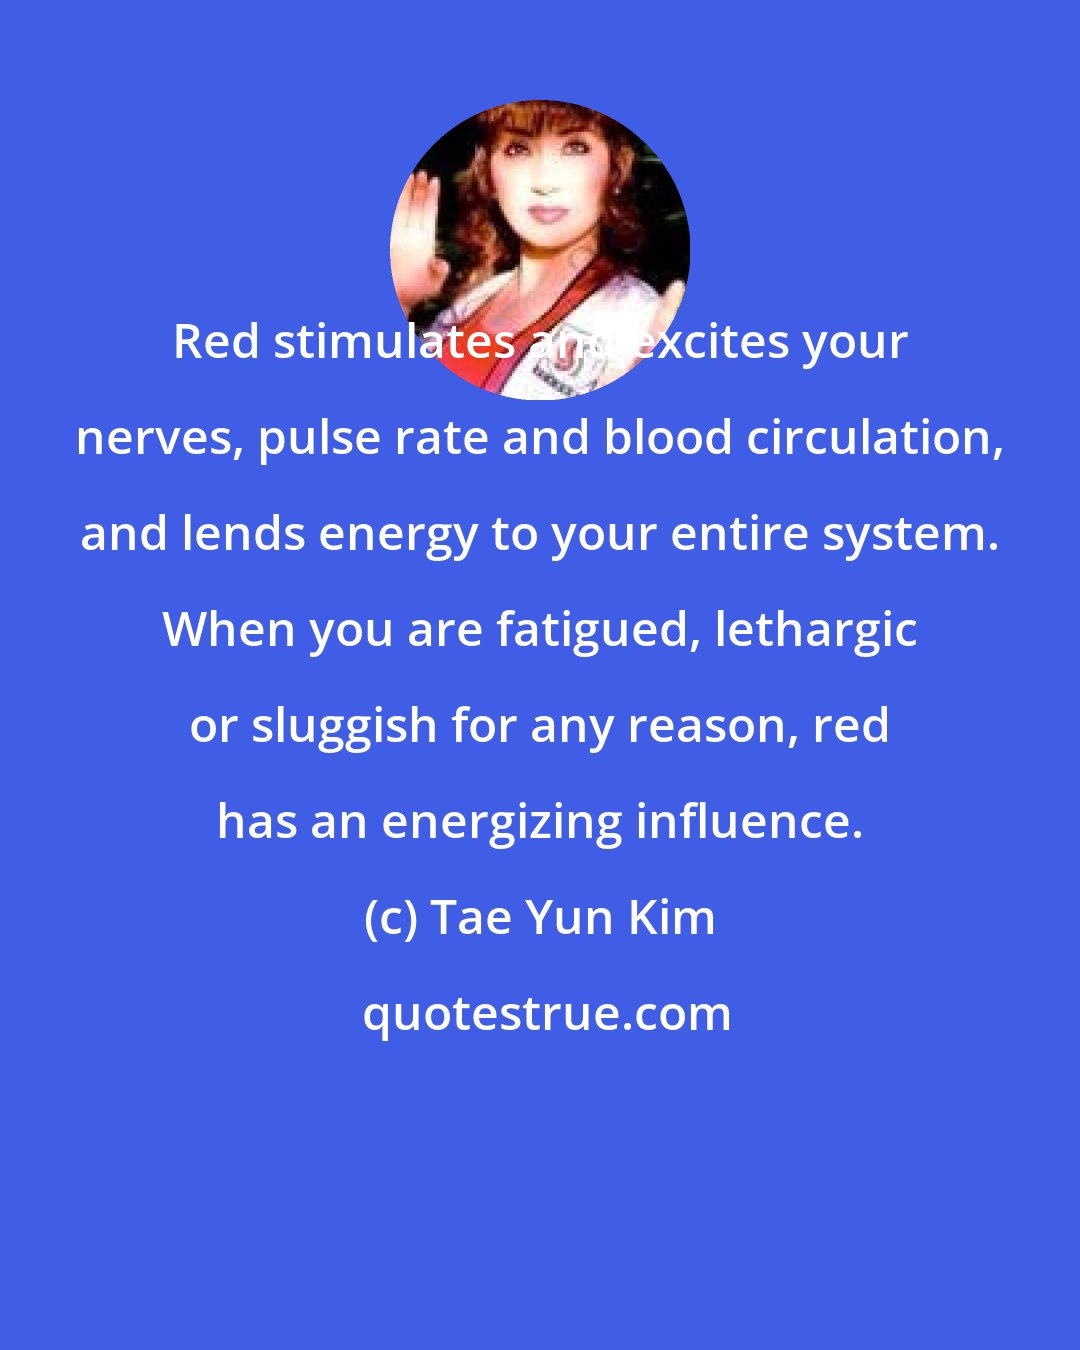 Tae Yun Kim: Red stimulates and excites your nerves, pulse rate and blood circulation, and lends energy to your entire system. When you are fatigued, lethargic or sluggish for any reason, red has an energizing influence.